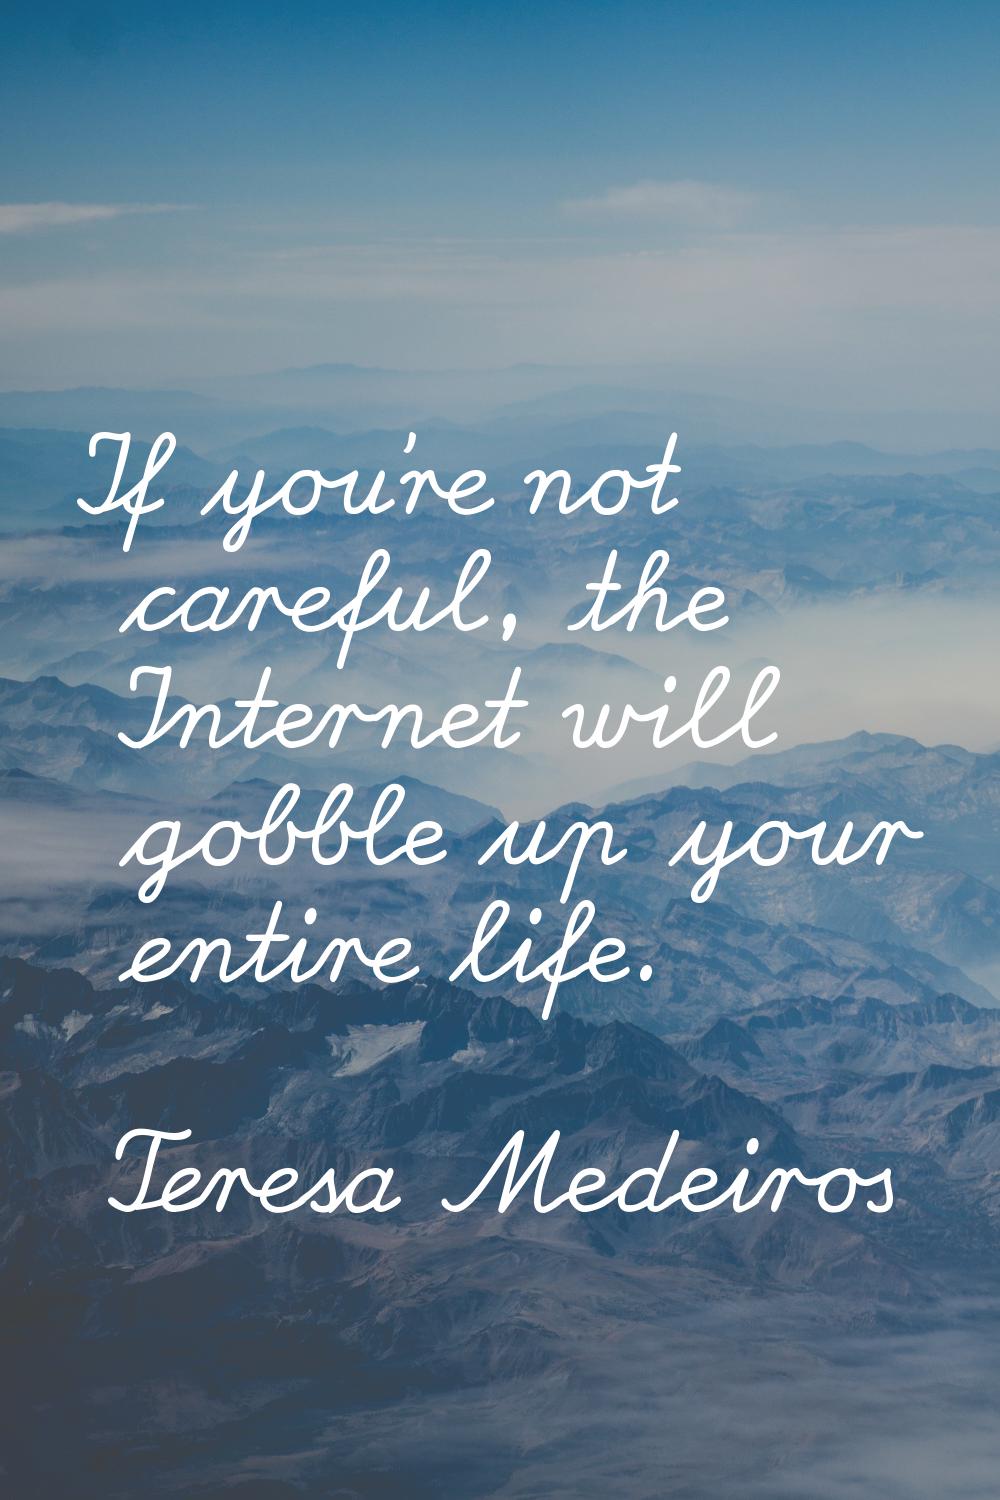 If you're not careful, the Internet will gobble up your entire life.